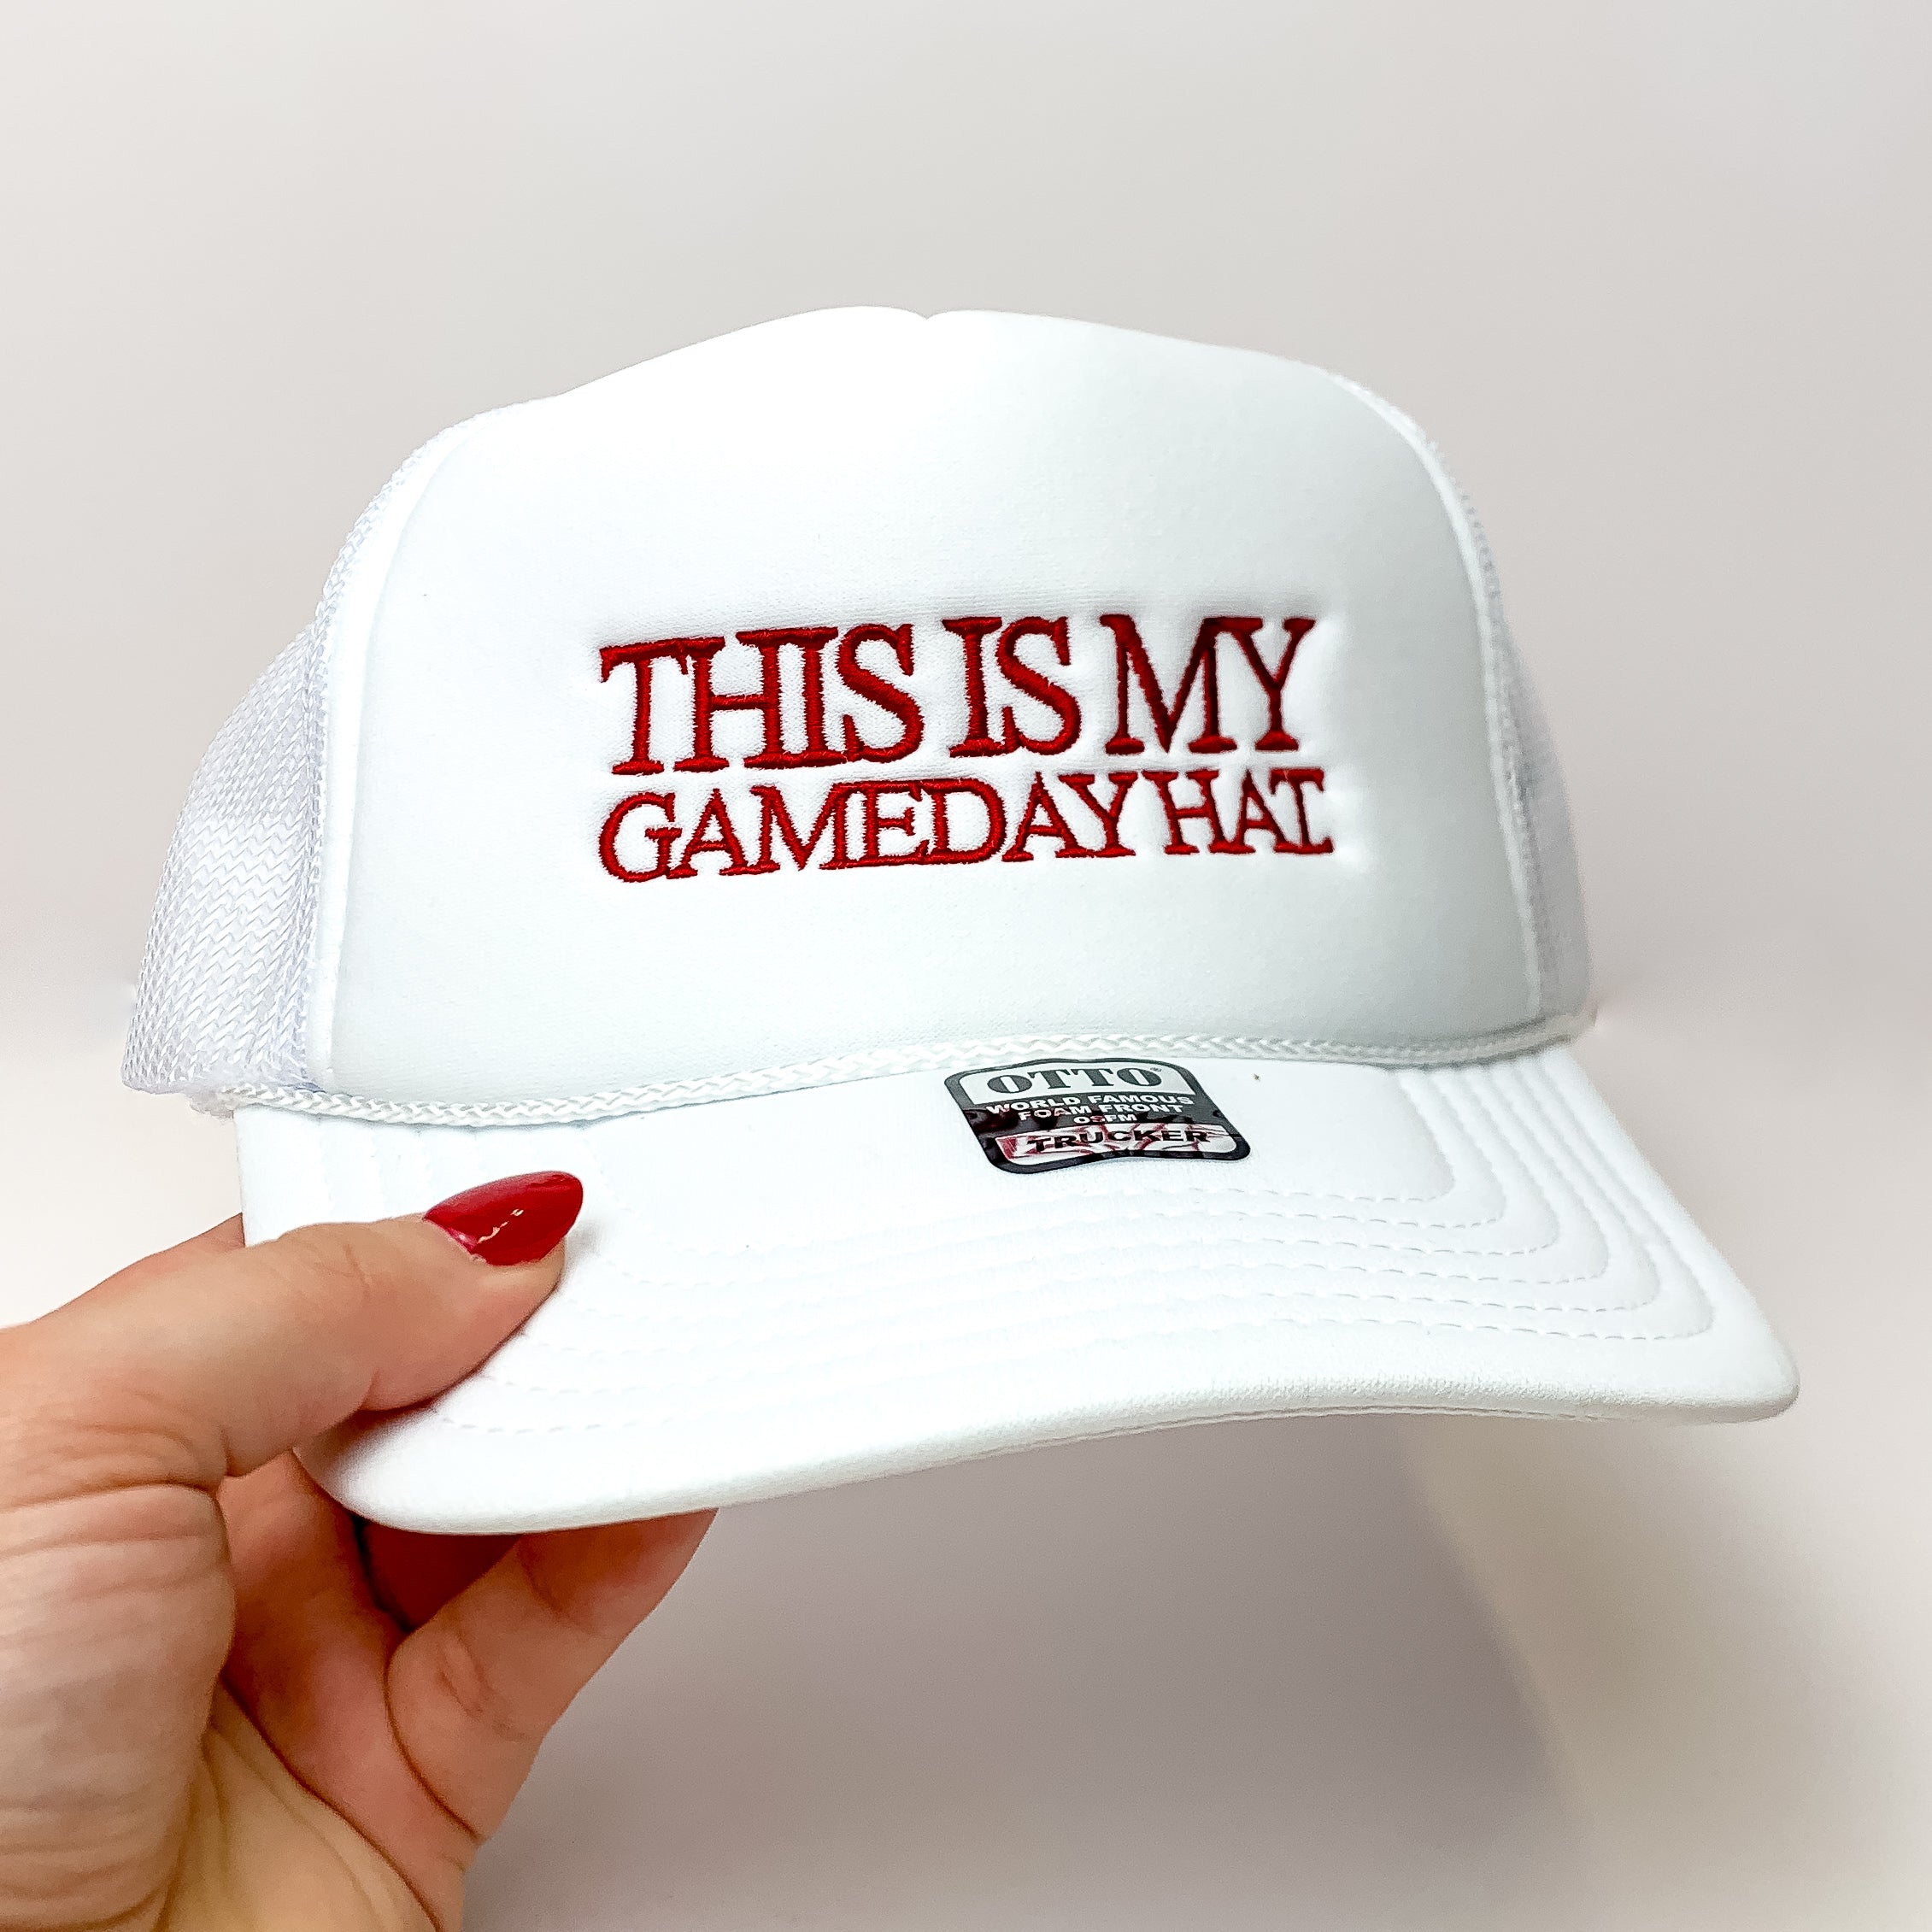 This Is My Gameday Hat Foam Trucker Hat in Maroon and White - Giddy Up Glamour Boutique